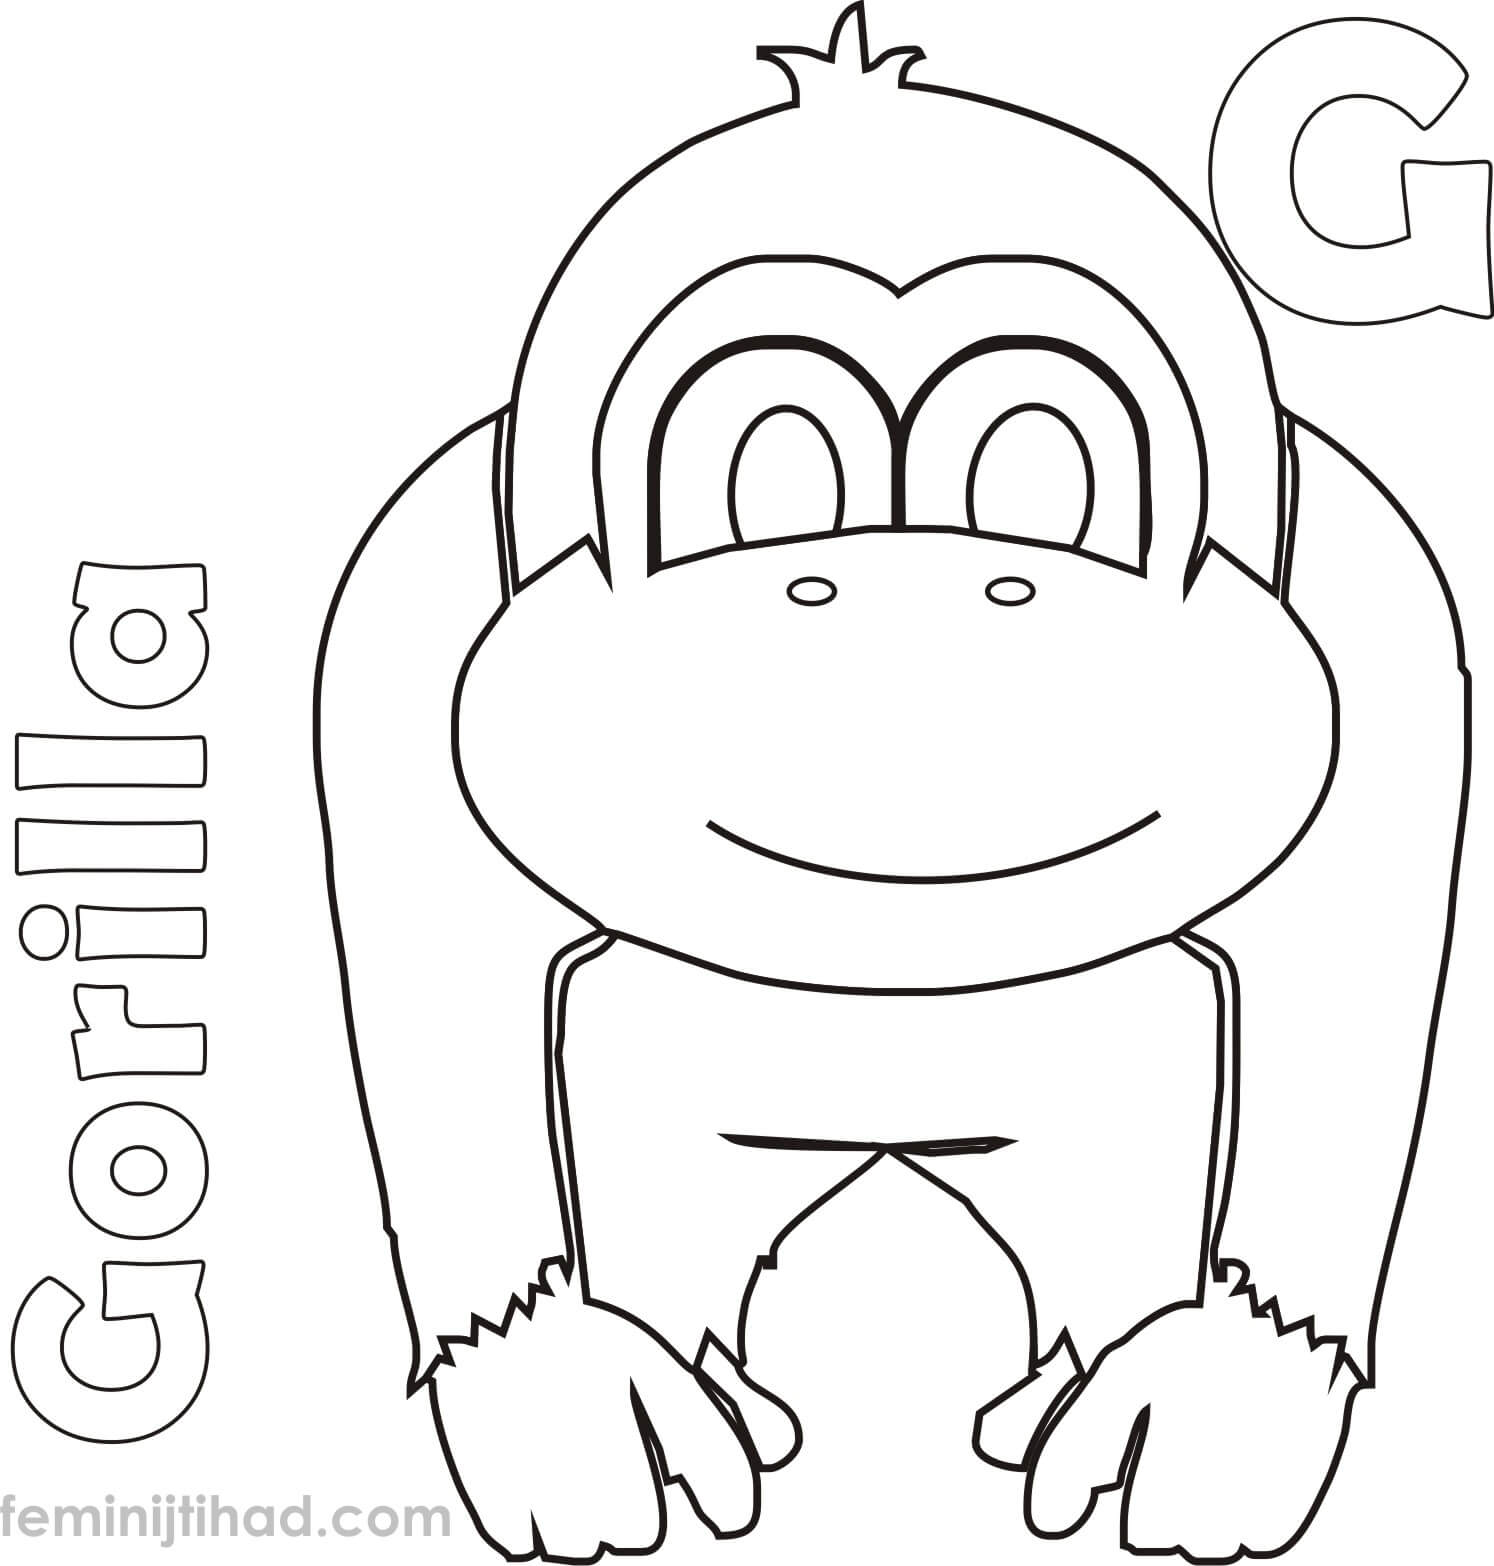 gorilla outline coloring page